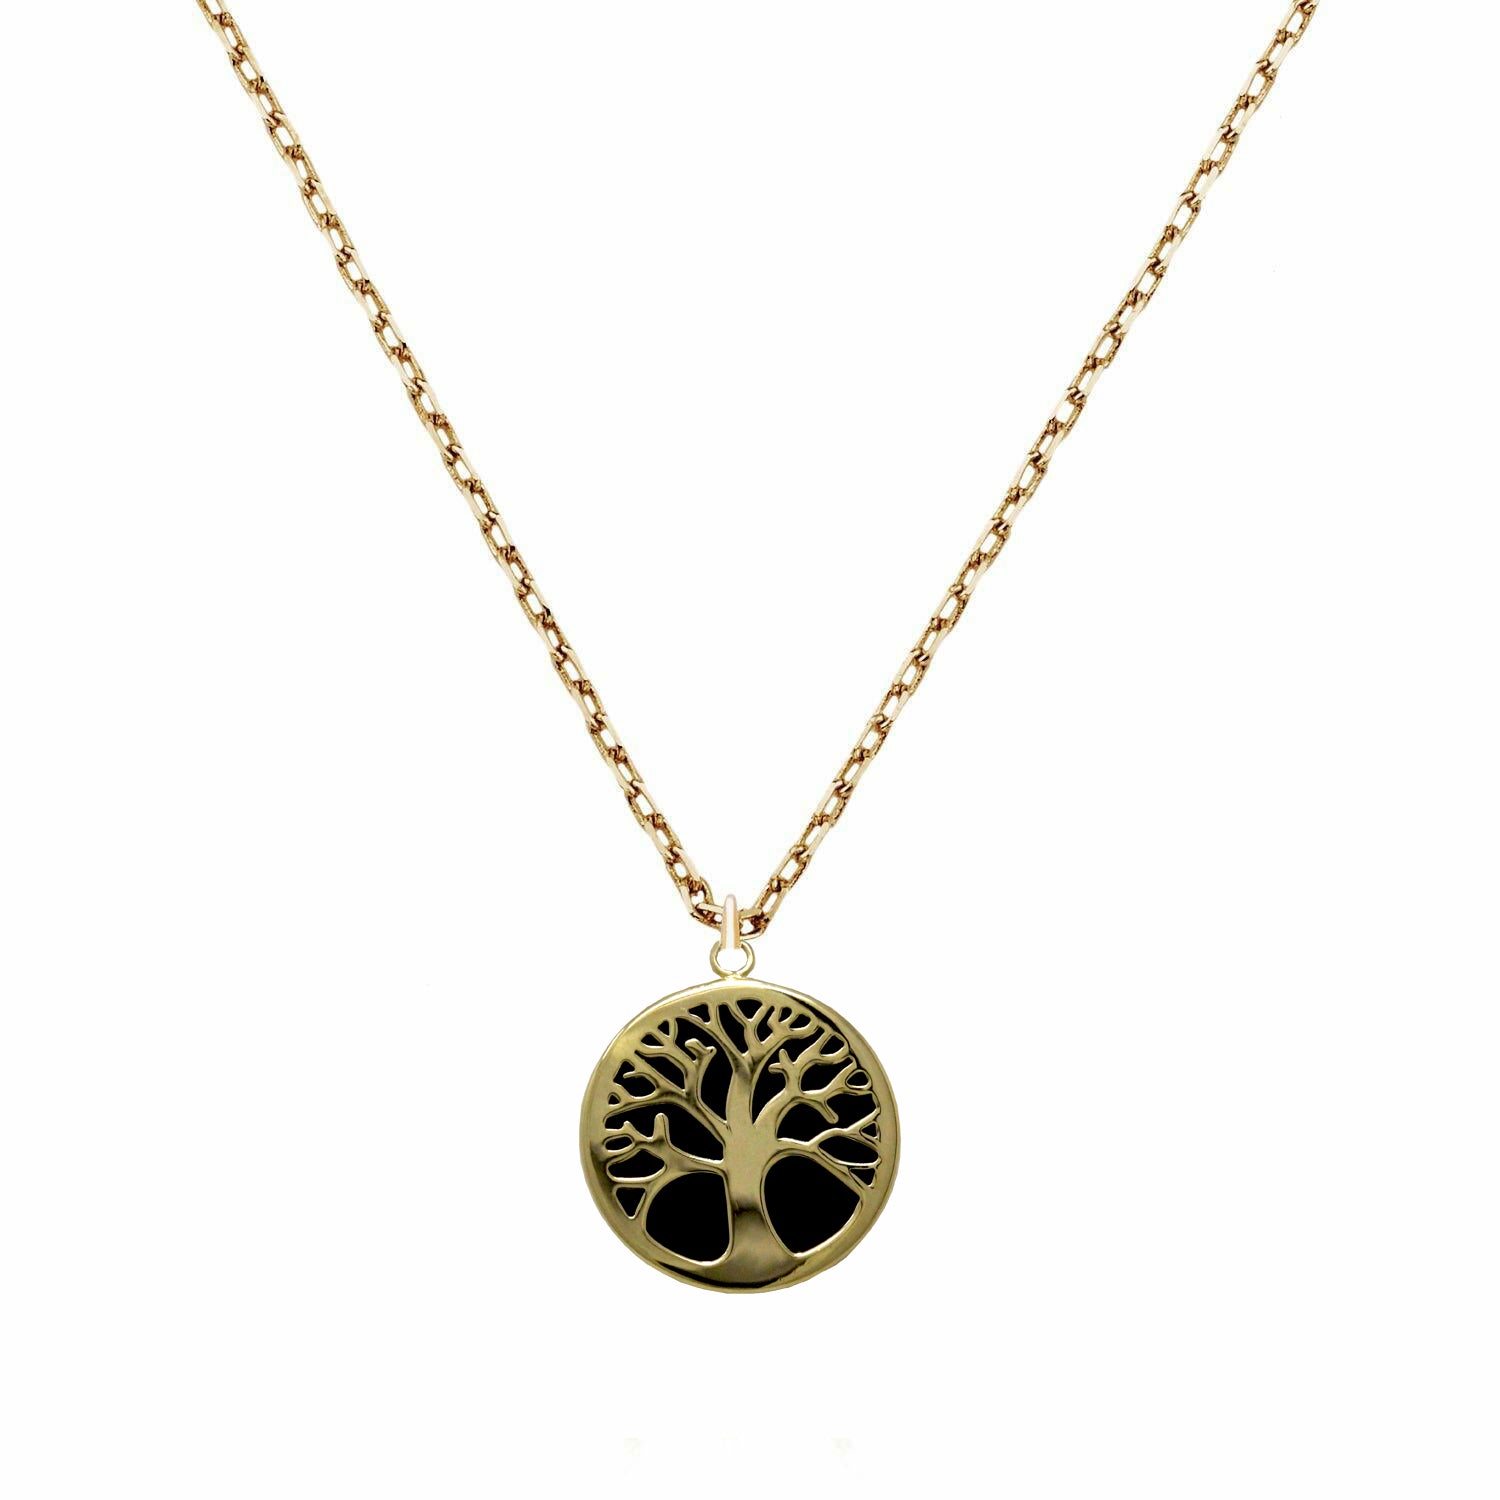 Round 14K Gold Tree of Life Pendant Necklace, Jewelry